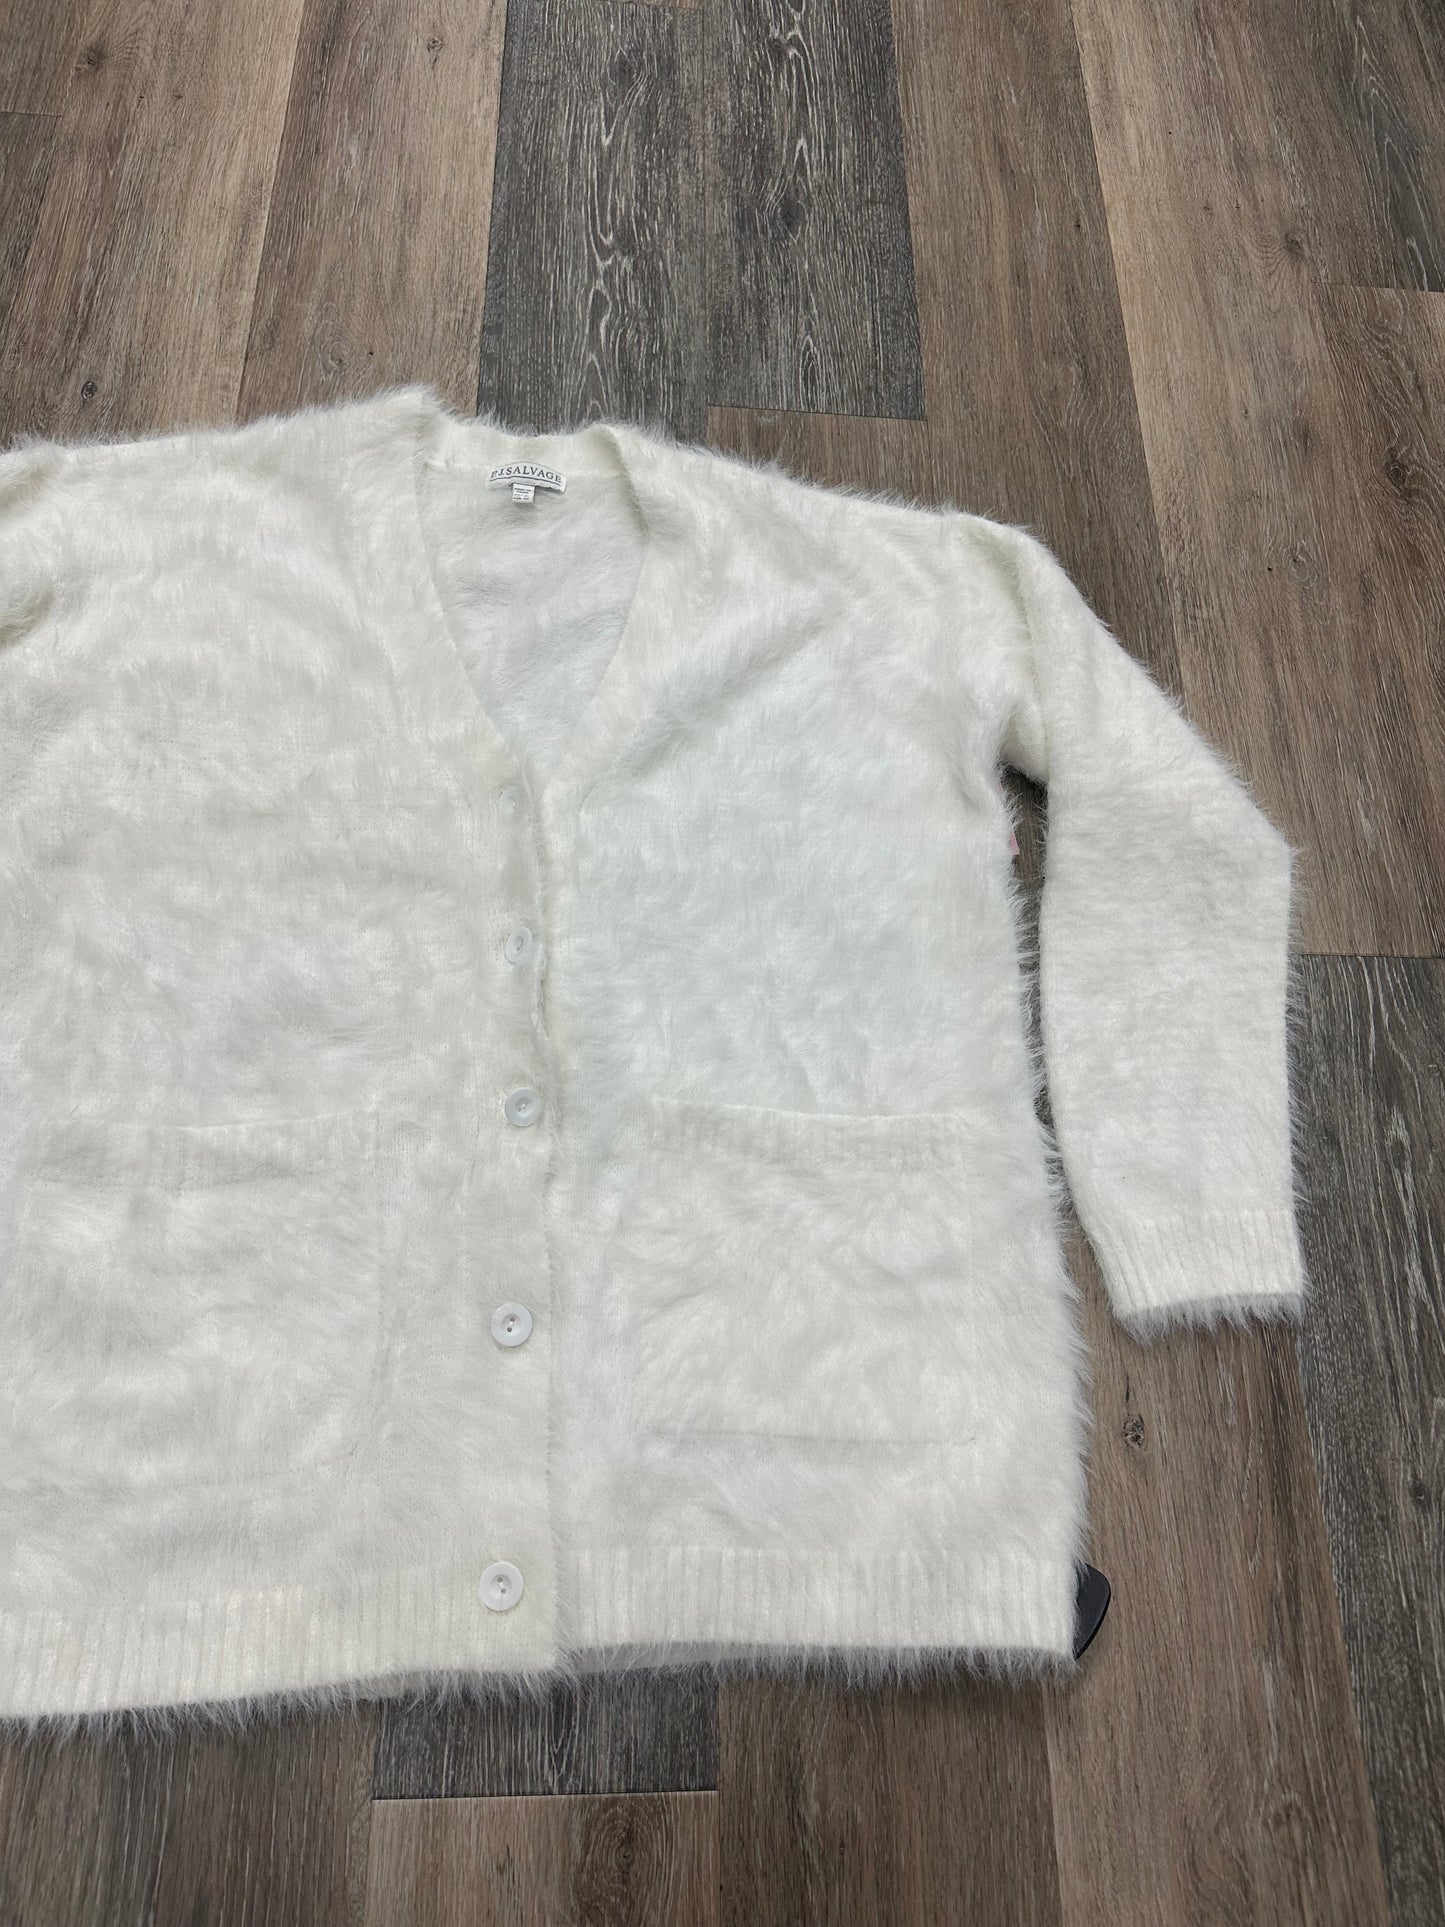 Sweater By PJ Salvage Size: Xl